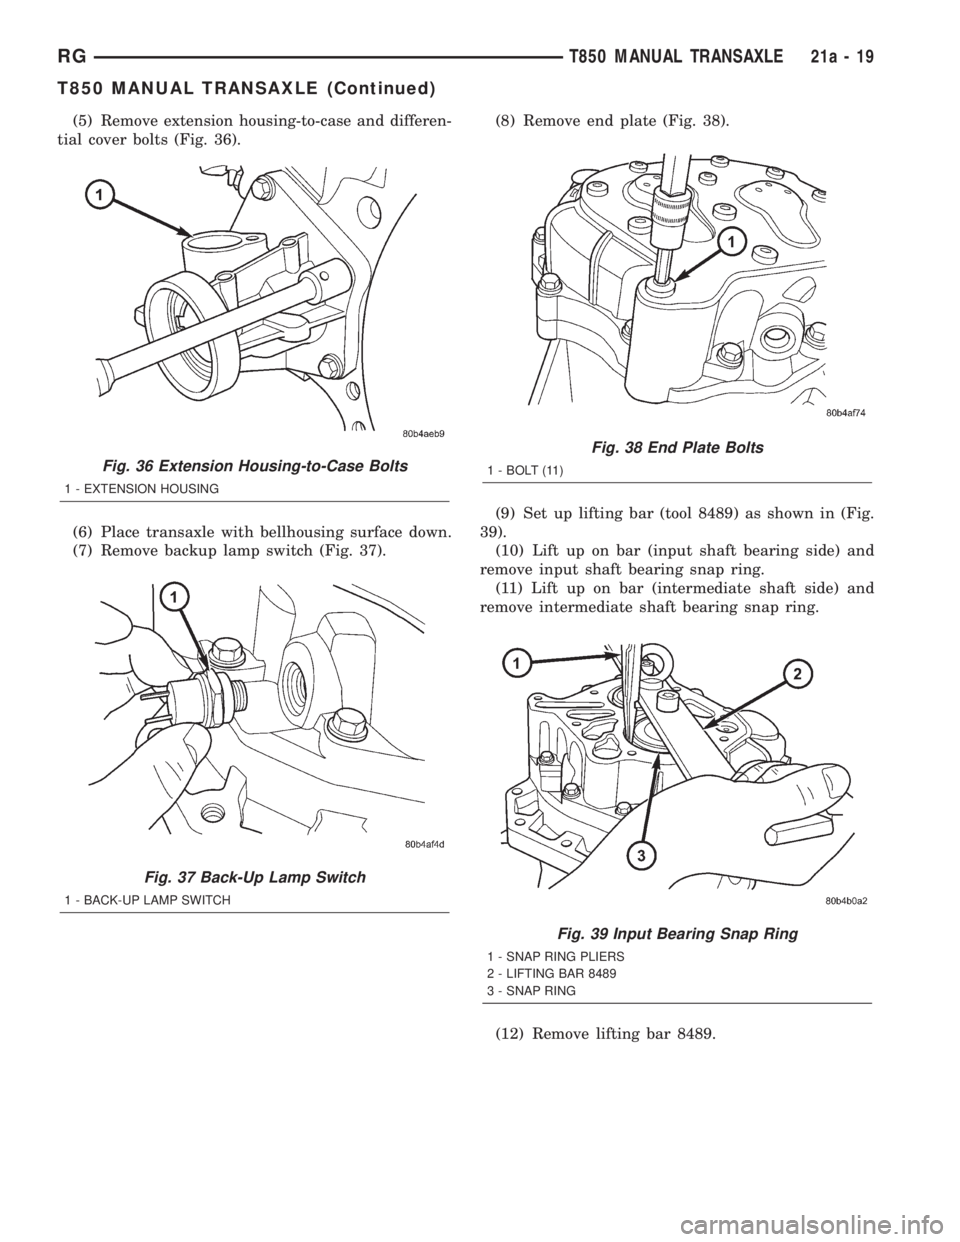 CHRYSLER VOYAGER 2001  Service Manual (5) Remove extension housing-to-case and differen-
tial cover bolts (Fig. 36).
(6) Place transaxle with bellhousing surface down.
(7) Remove backup lamp switch (Fig. 37).(8) Remove end plate (Fig. 38)